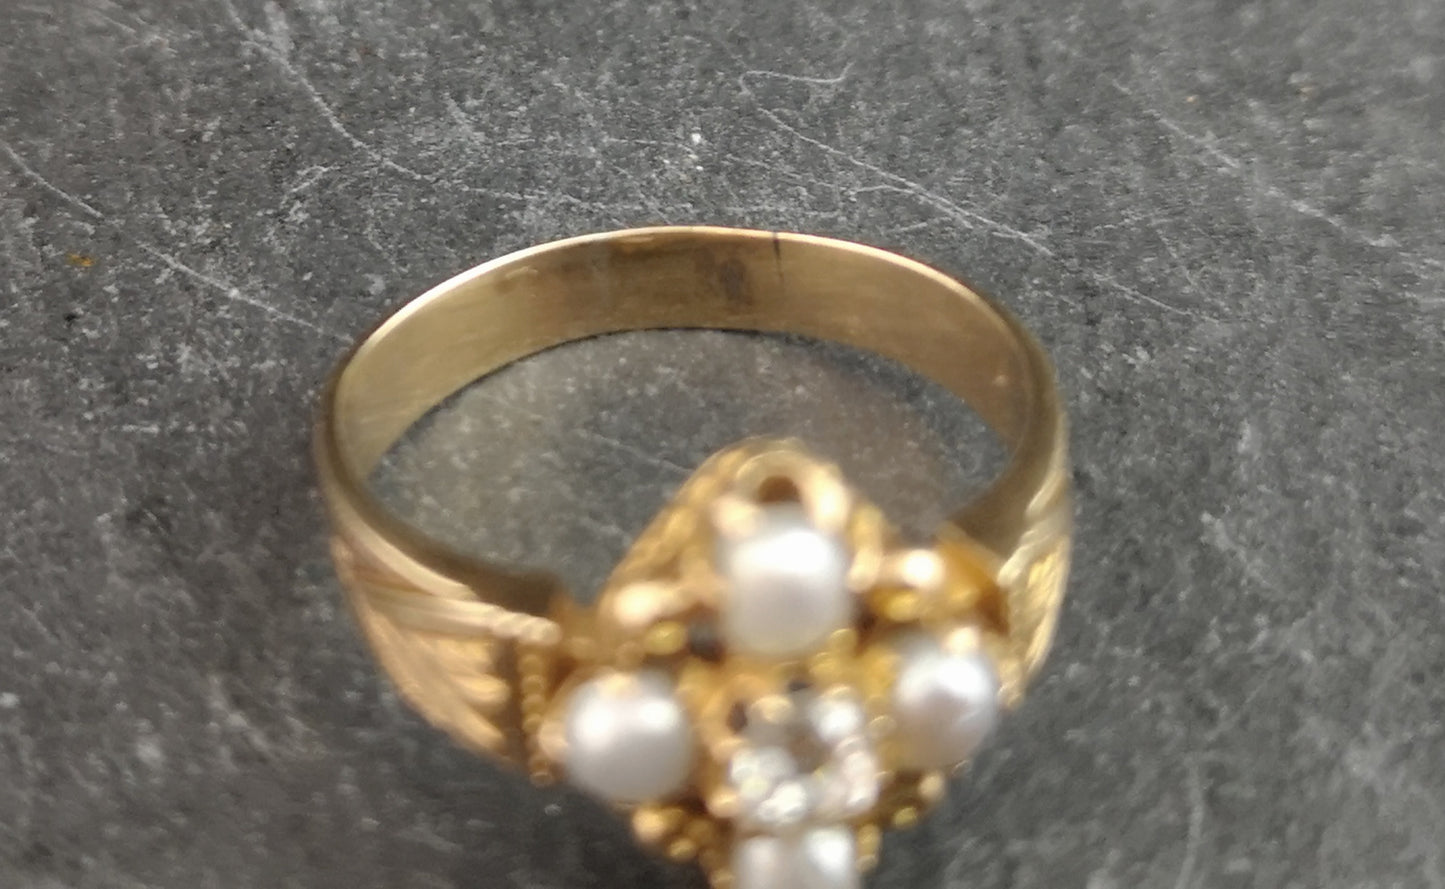 Sold on layaway - Victorian diamond and pearl navette ring, 15ct gold